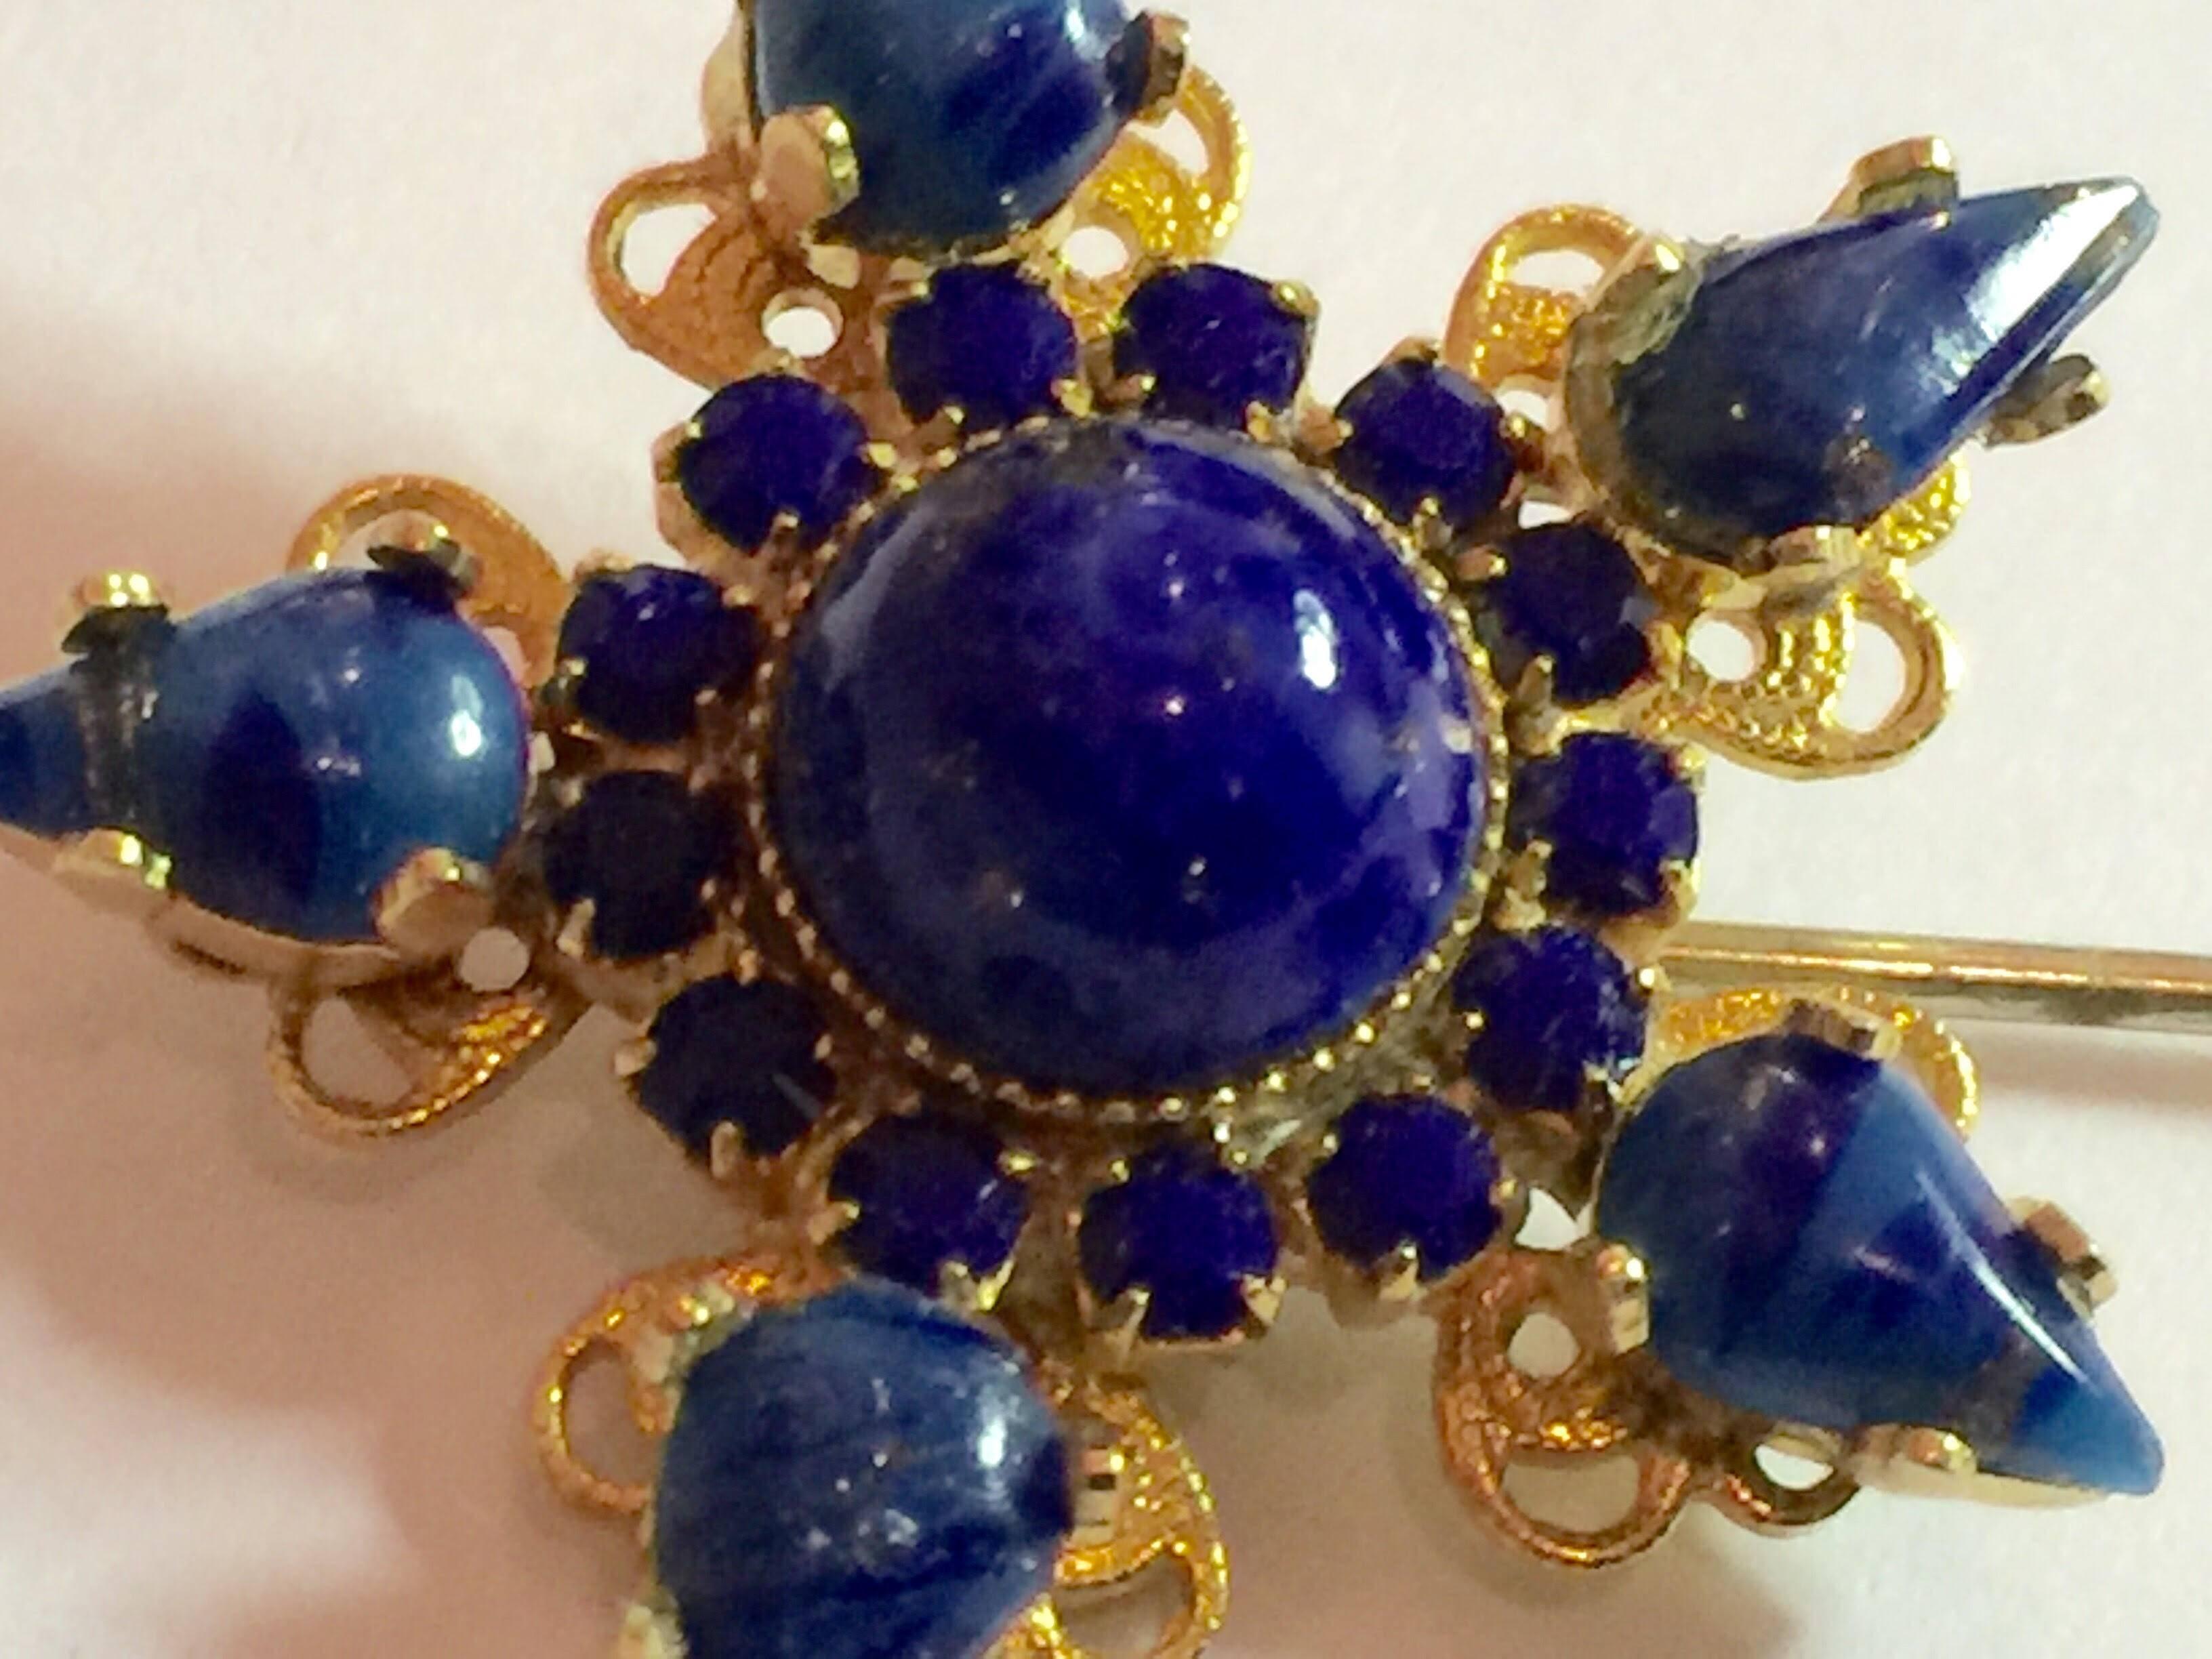 Always elegant jabot style hat pins have been made by a wide variety of costume jewelry designers. This gold toned faux lapis star shaped jabot pin is approximately 1.1 inches square (the star) and the entirety of the brooch is 3 inches long. It